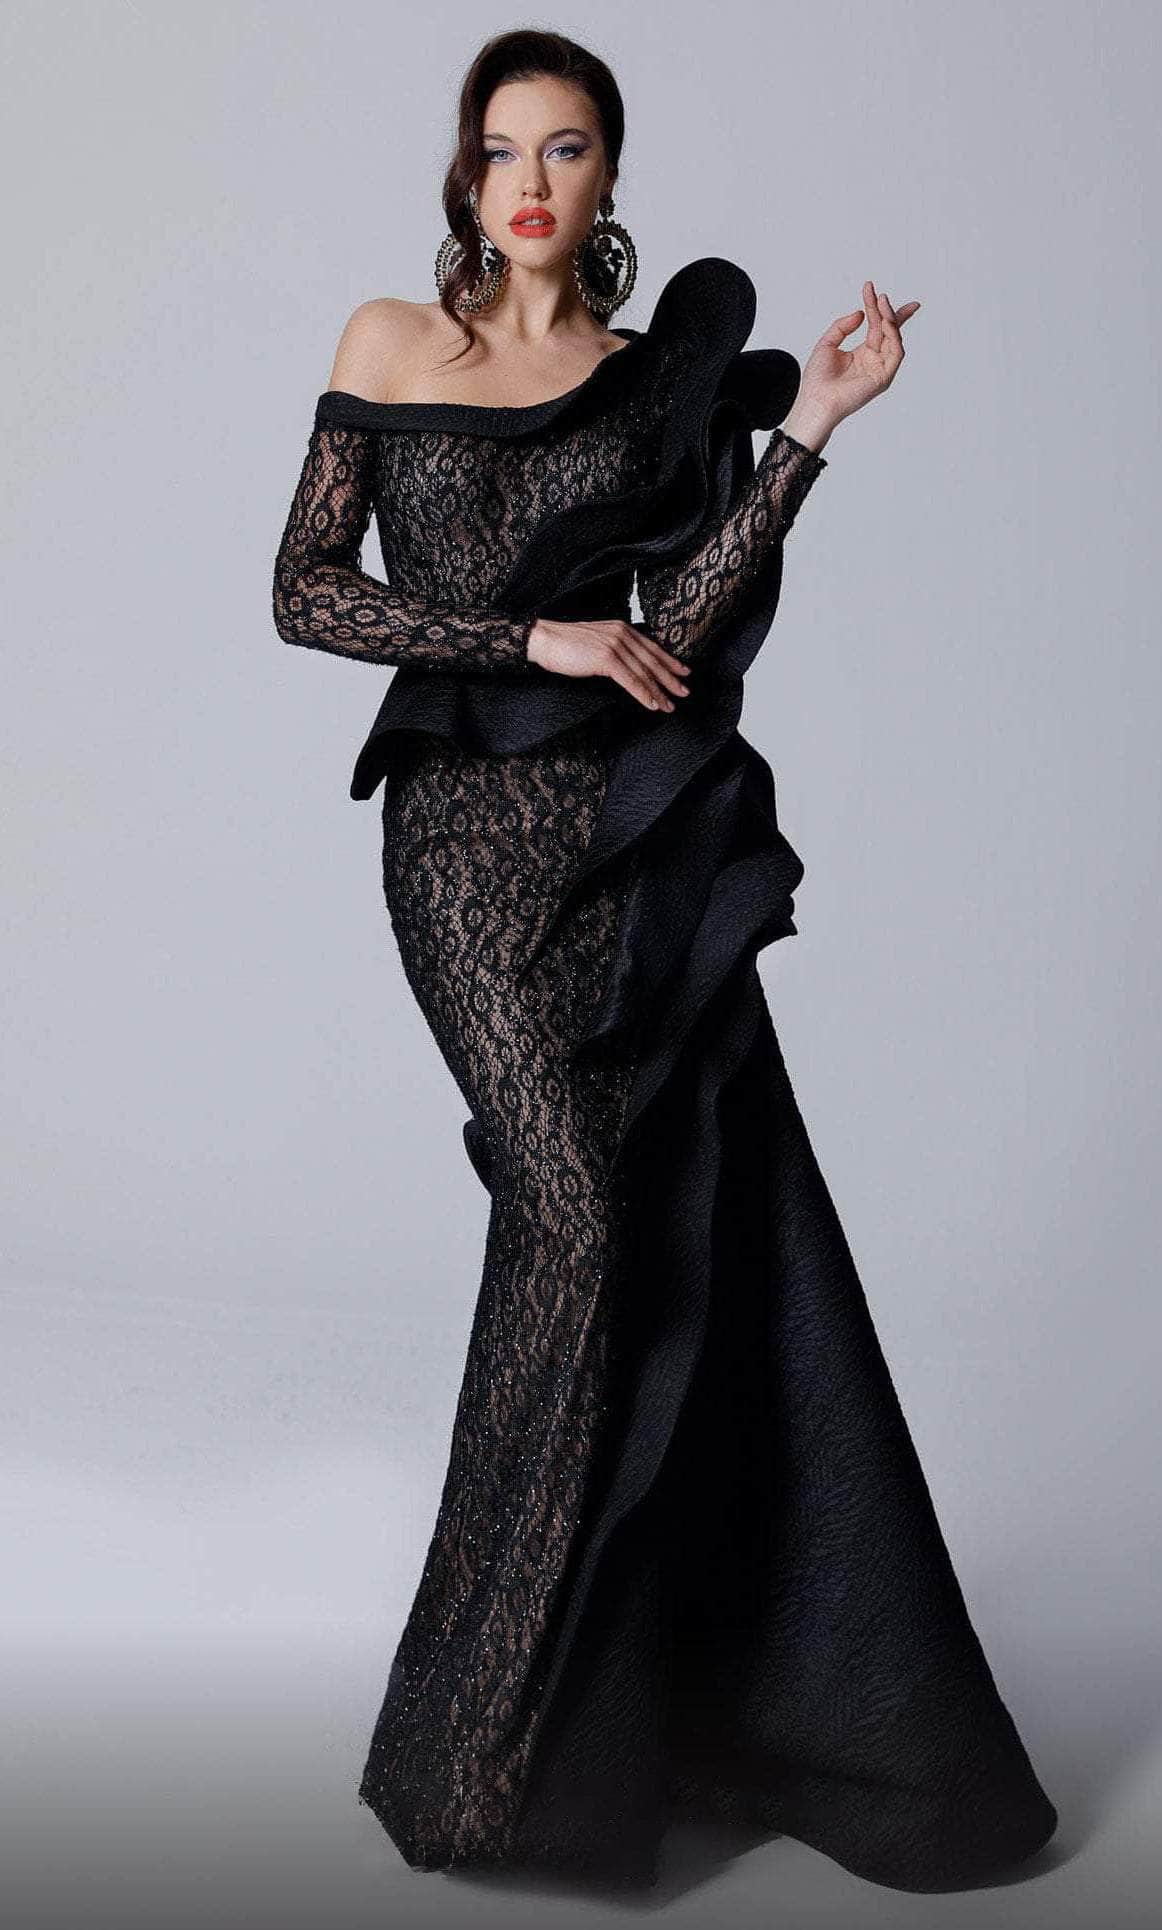 Image of MNM Couture 2735 - Asymmetric Beaded Lace Evening Gown